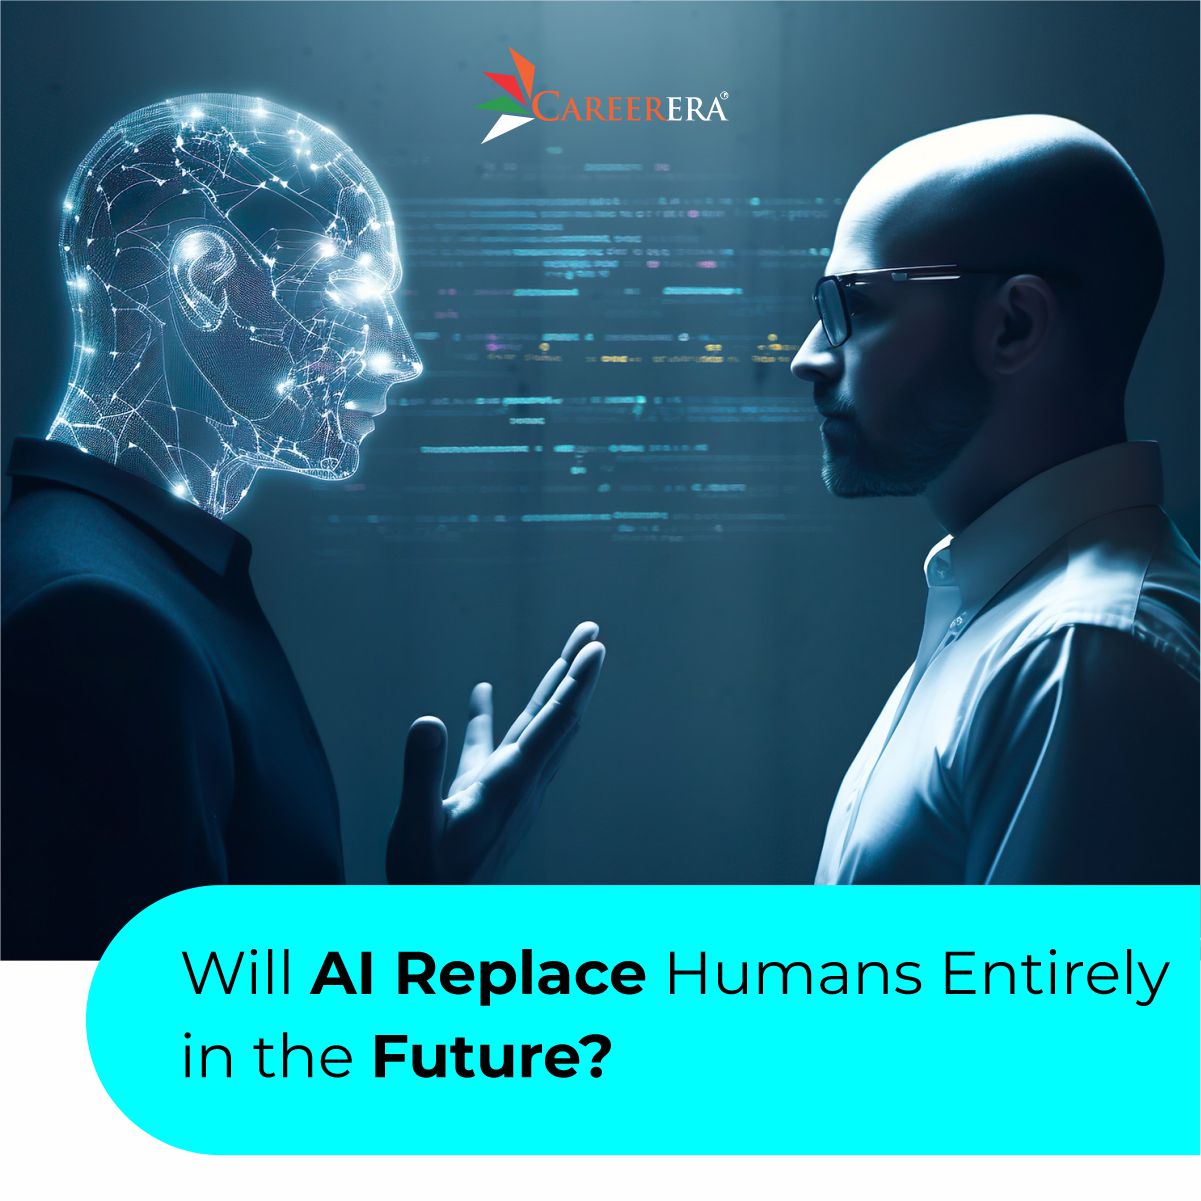 Will AI Replace Humans Entirely in the Future?